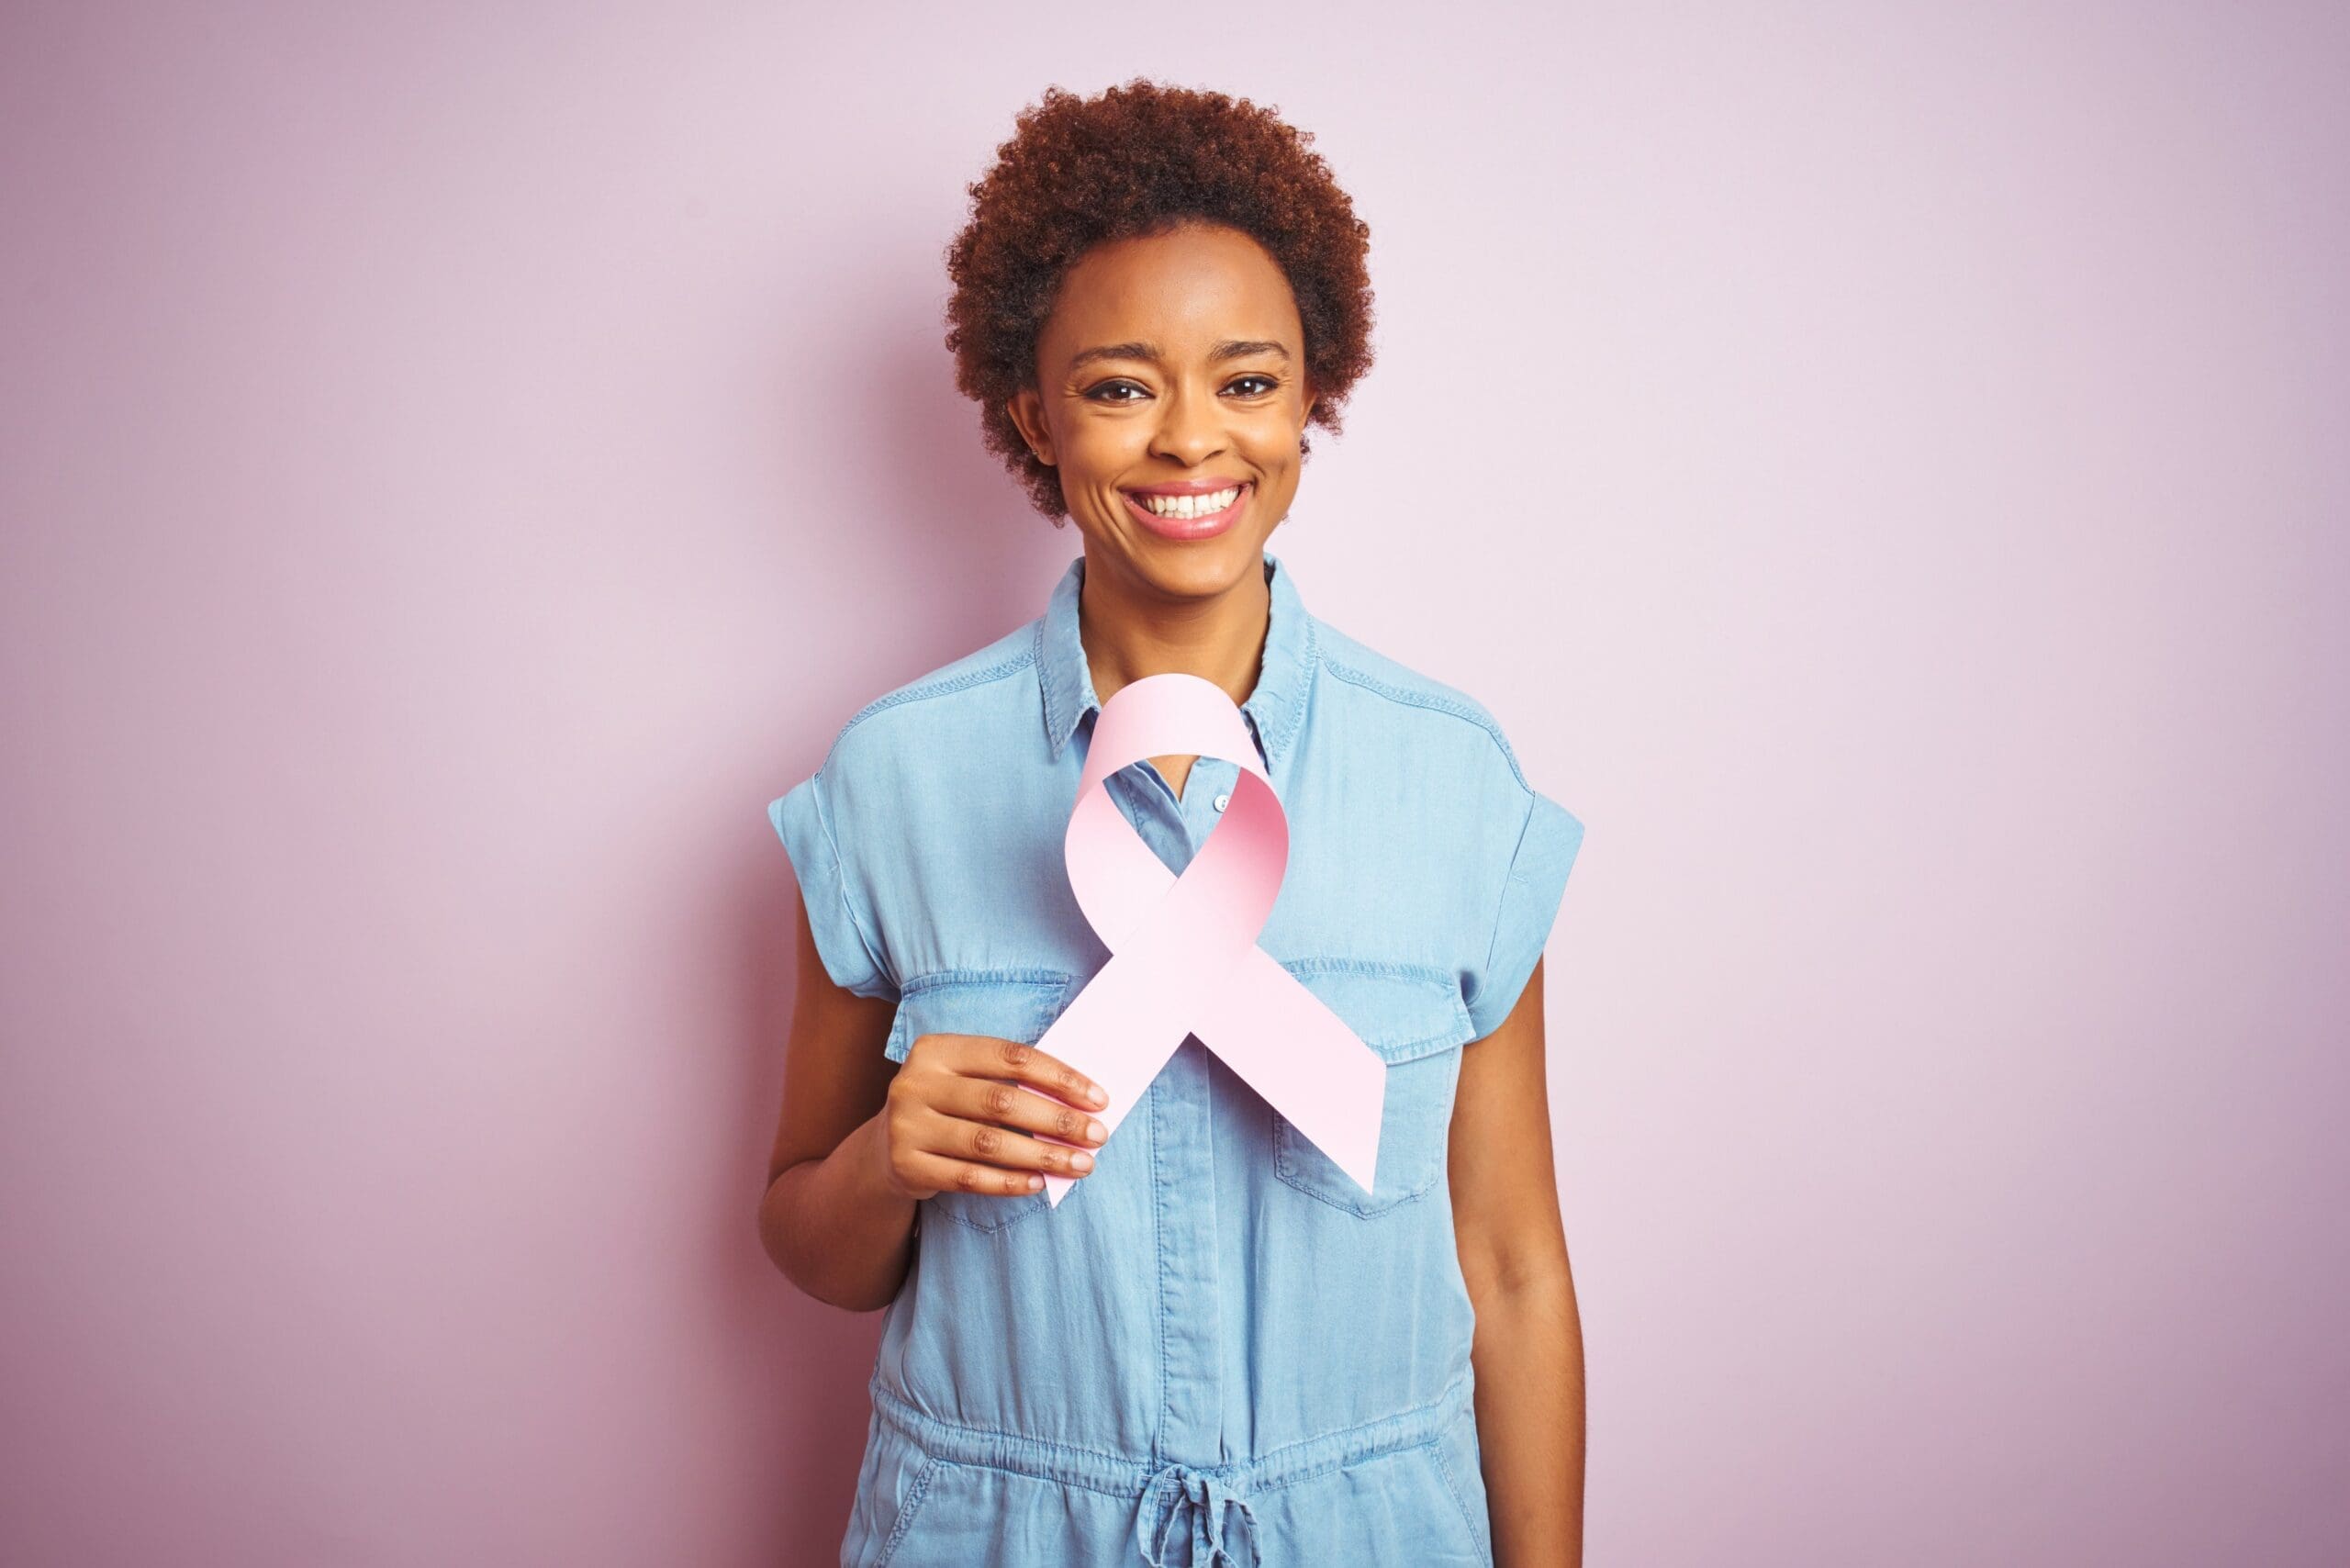 Breast Cancer Overview